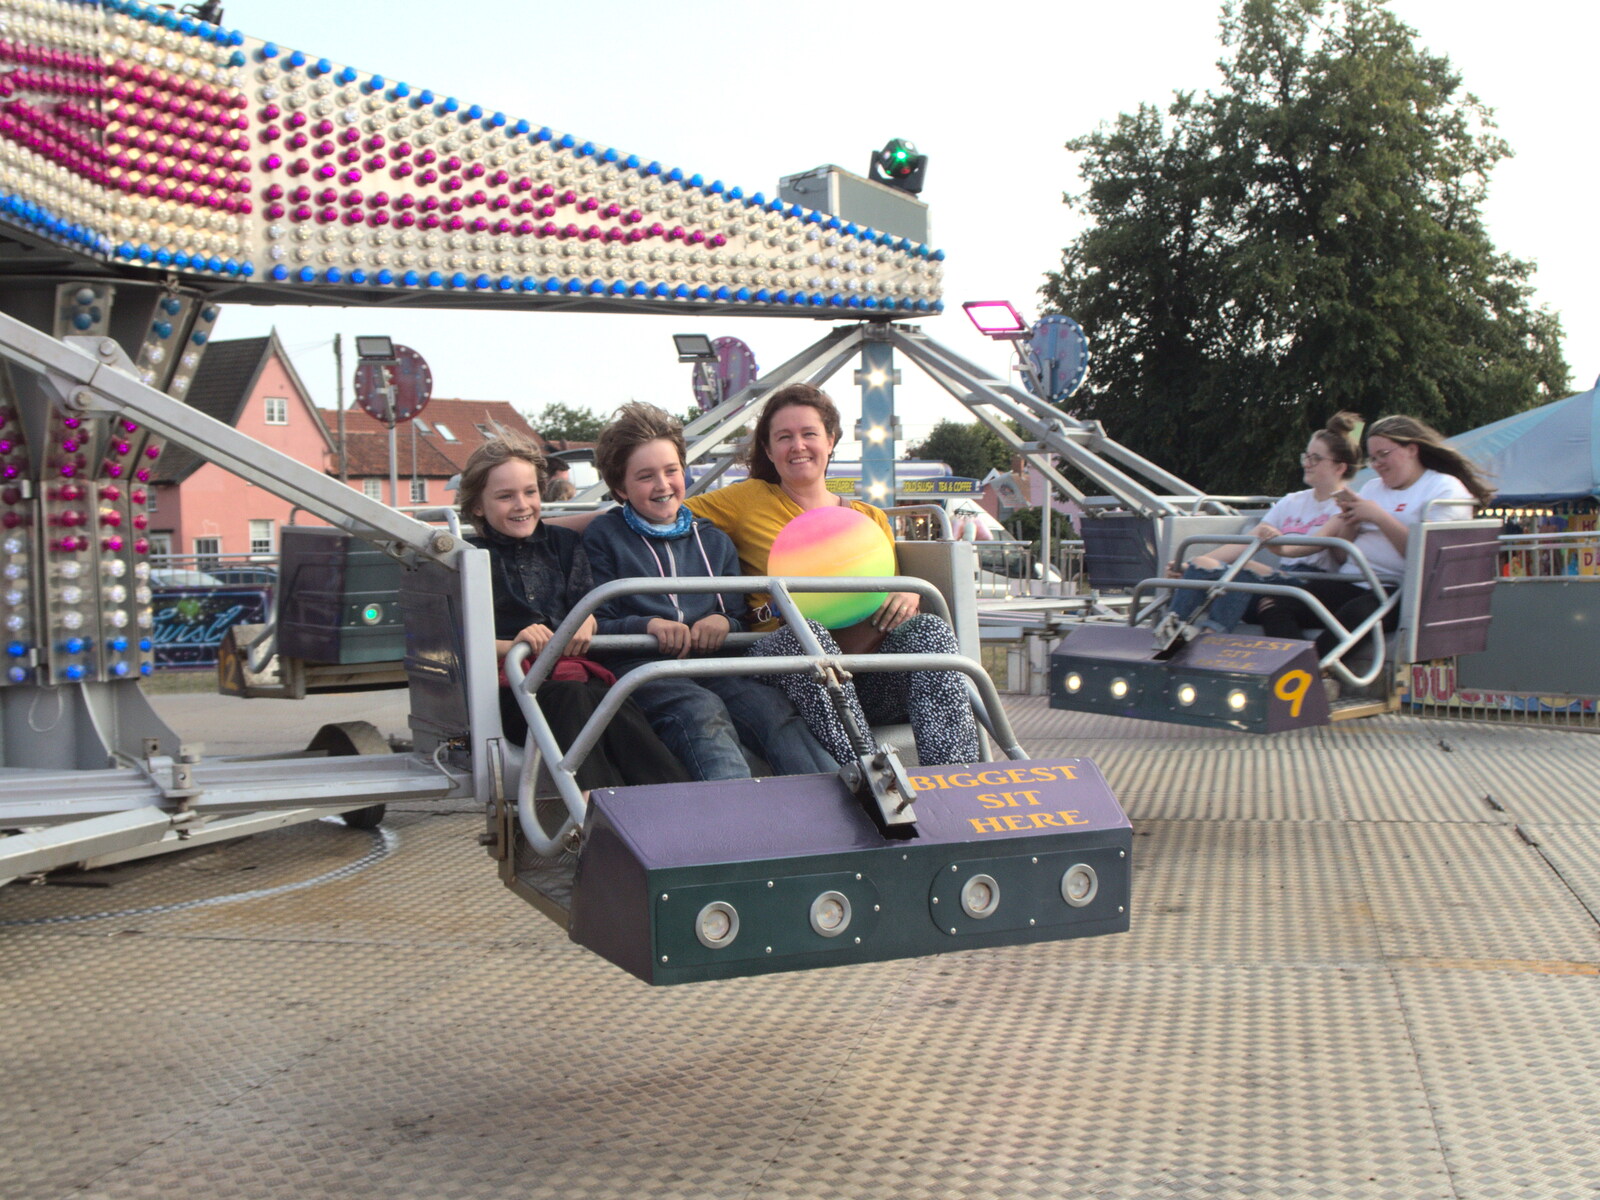 Harry, Fred and Isobel on the spinner from A Few Hours at the Fair, Fair Green, Diss, Norfolk - 5th September 2021